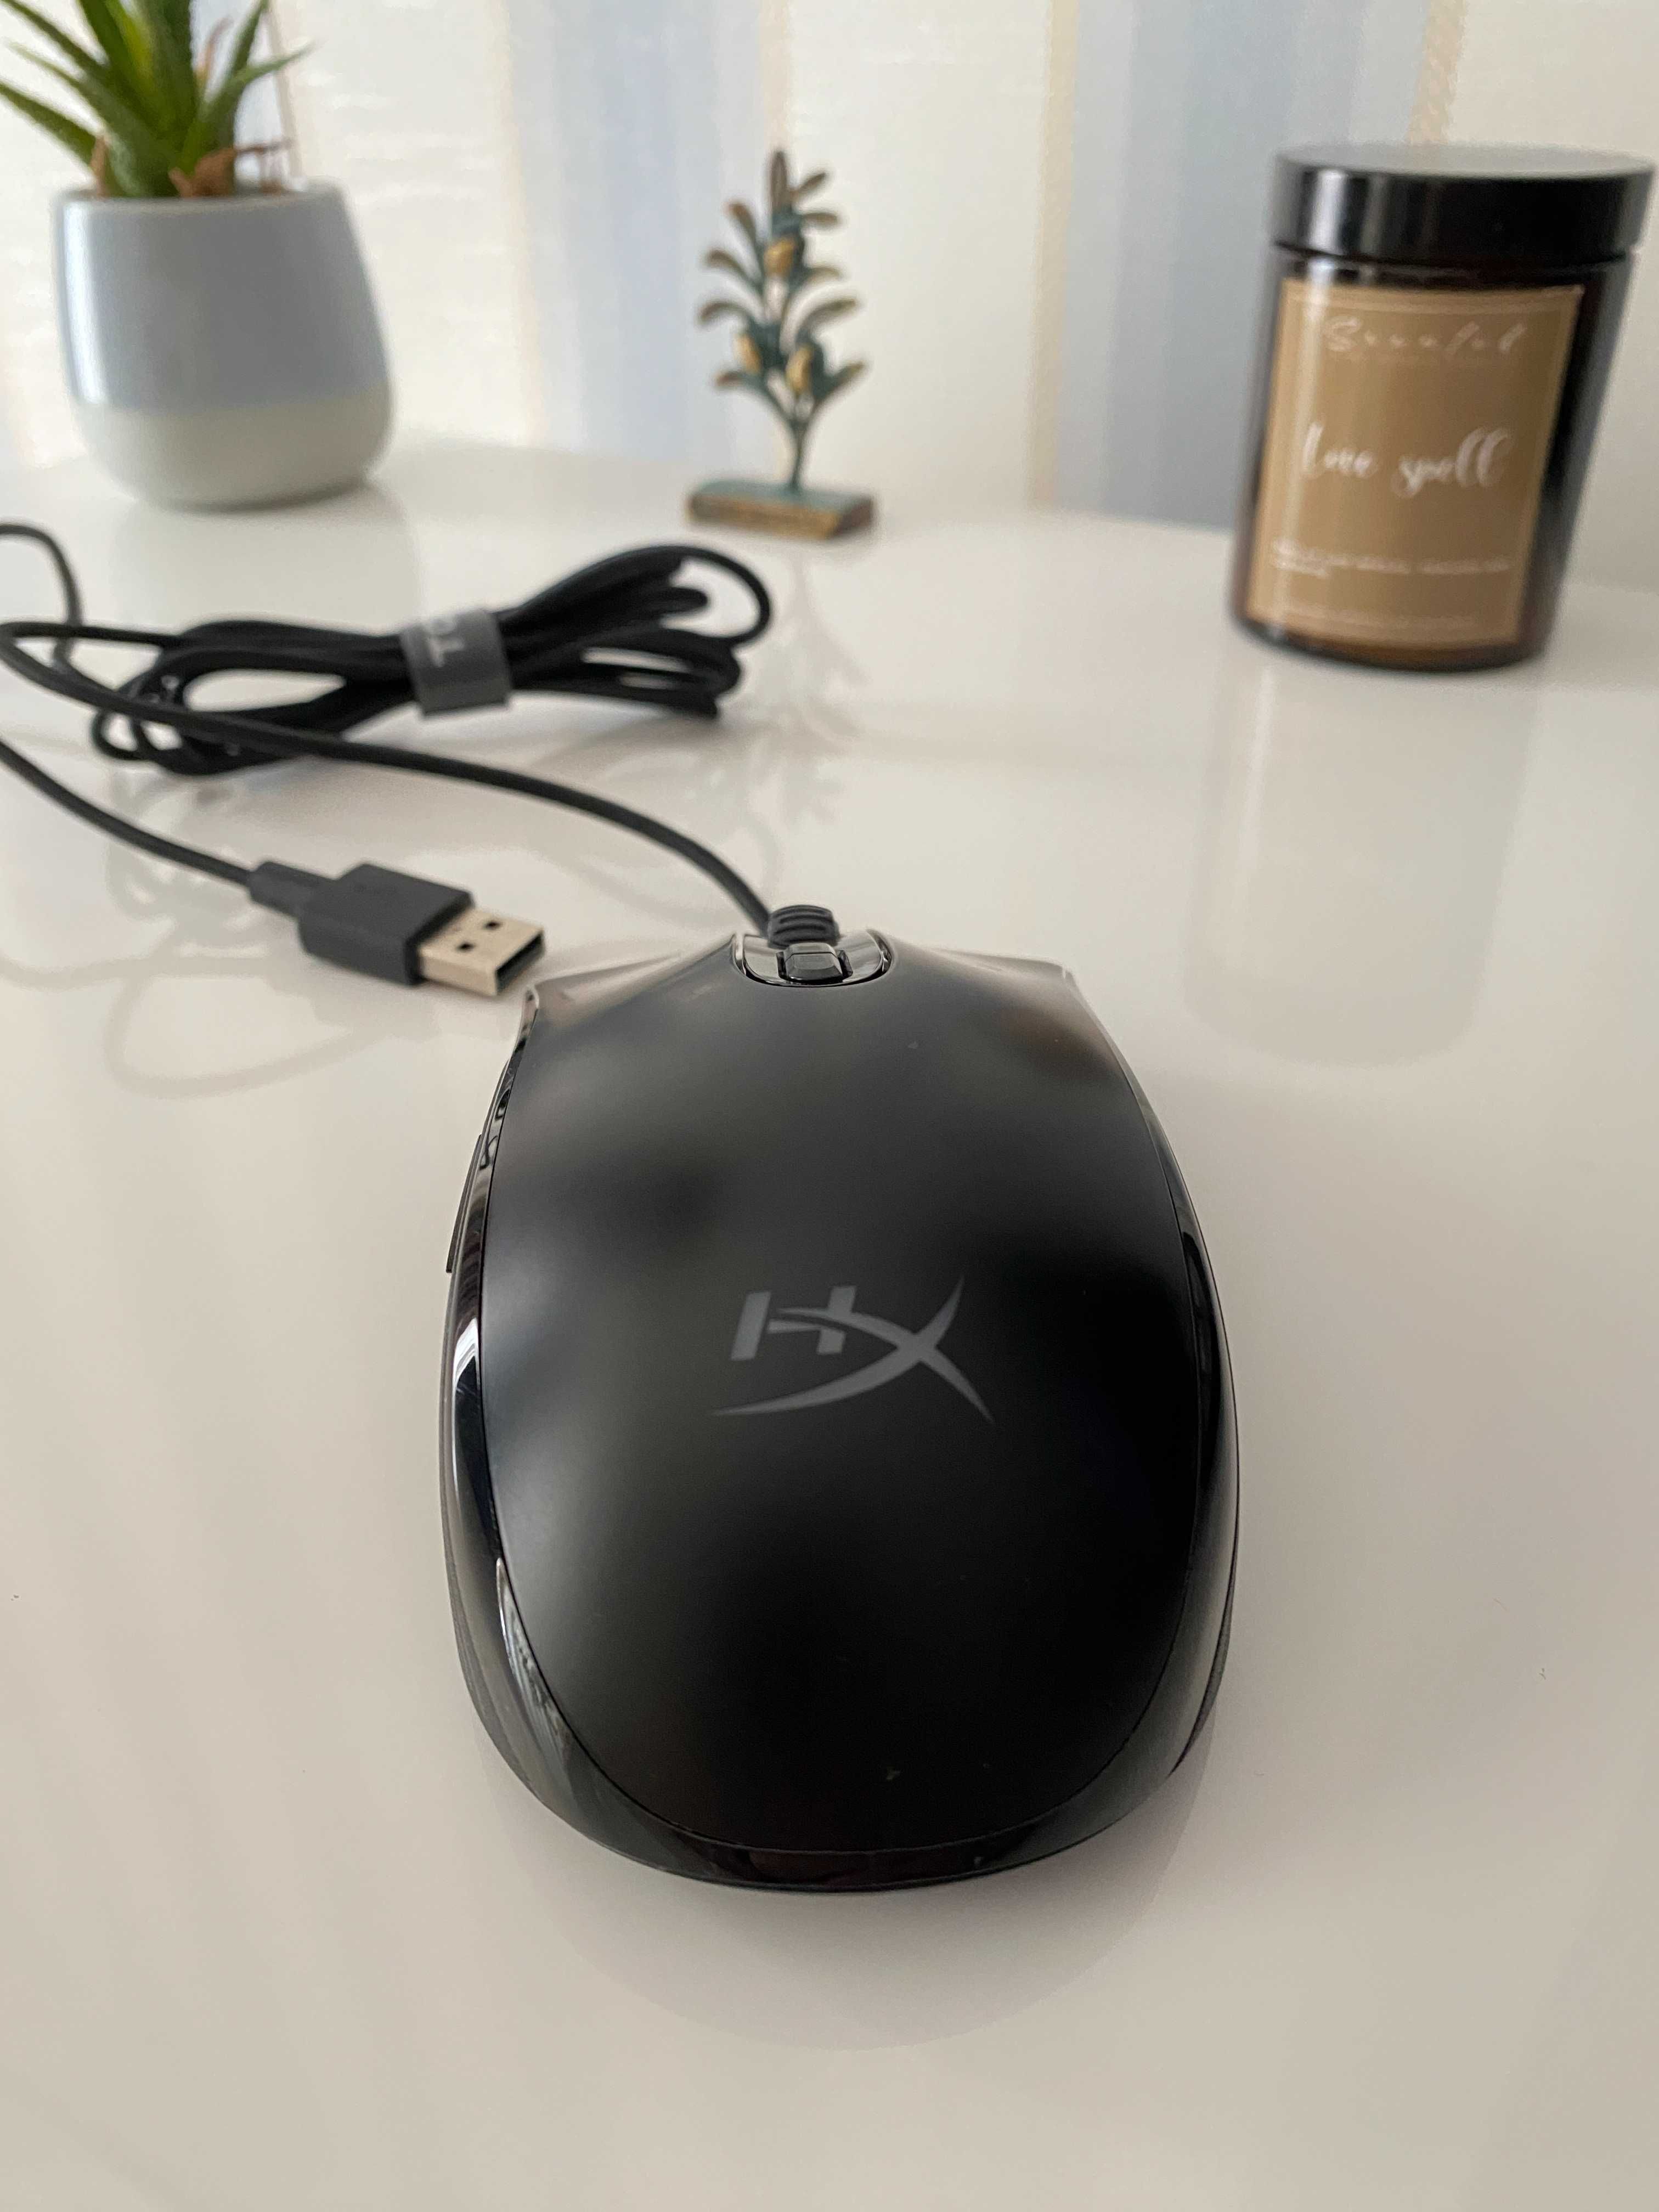 Mouse Gaming HyperX Pulsefire Core